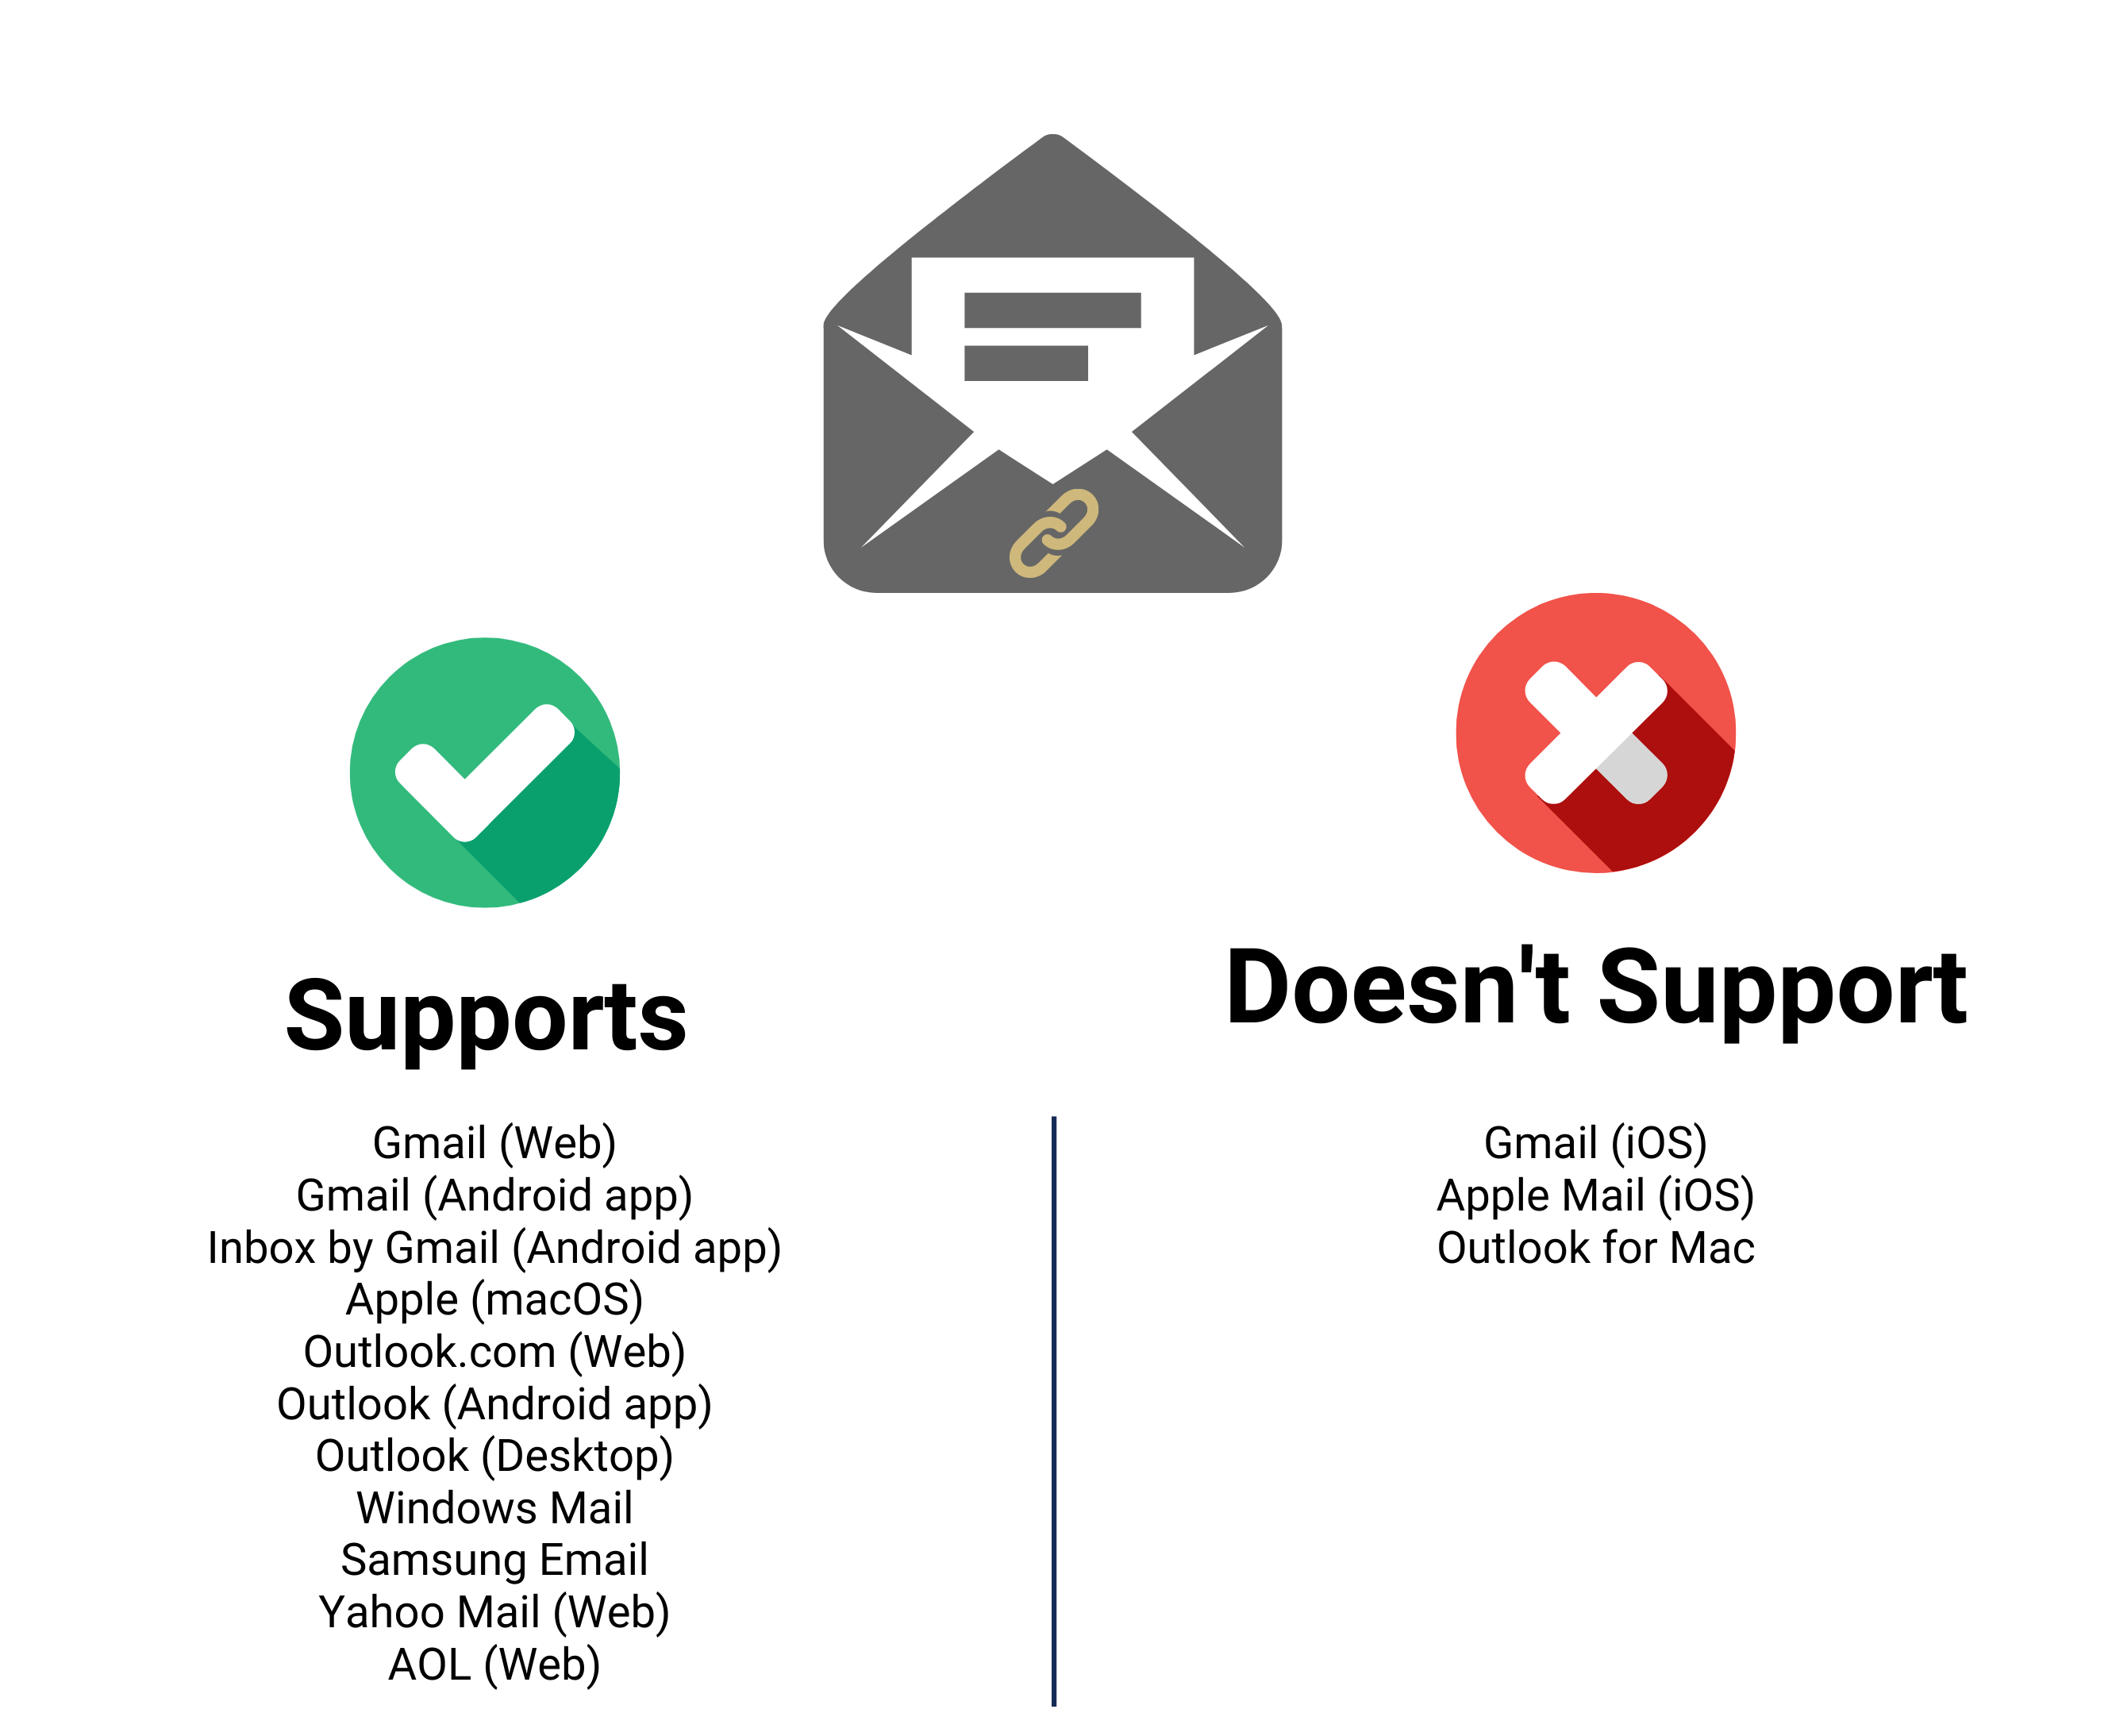 Support: Gmail web and Android app, Inbox by Gmail Android app, Yahoo Mail web, Outlook.com web and Android app, Samsung email, Windows Mail, Apple macOS, AOL web. Doesn't support: Gmail iOS, Apple Mail iOS, Outlook for Mac.